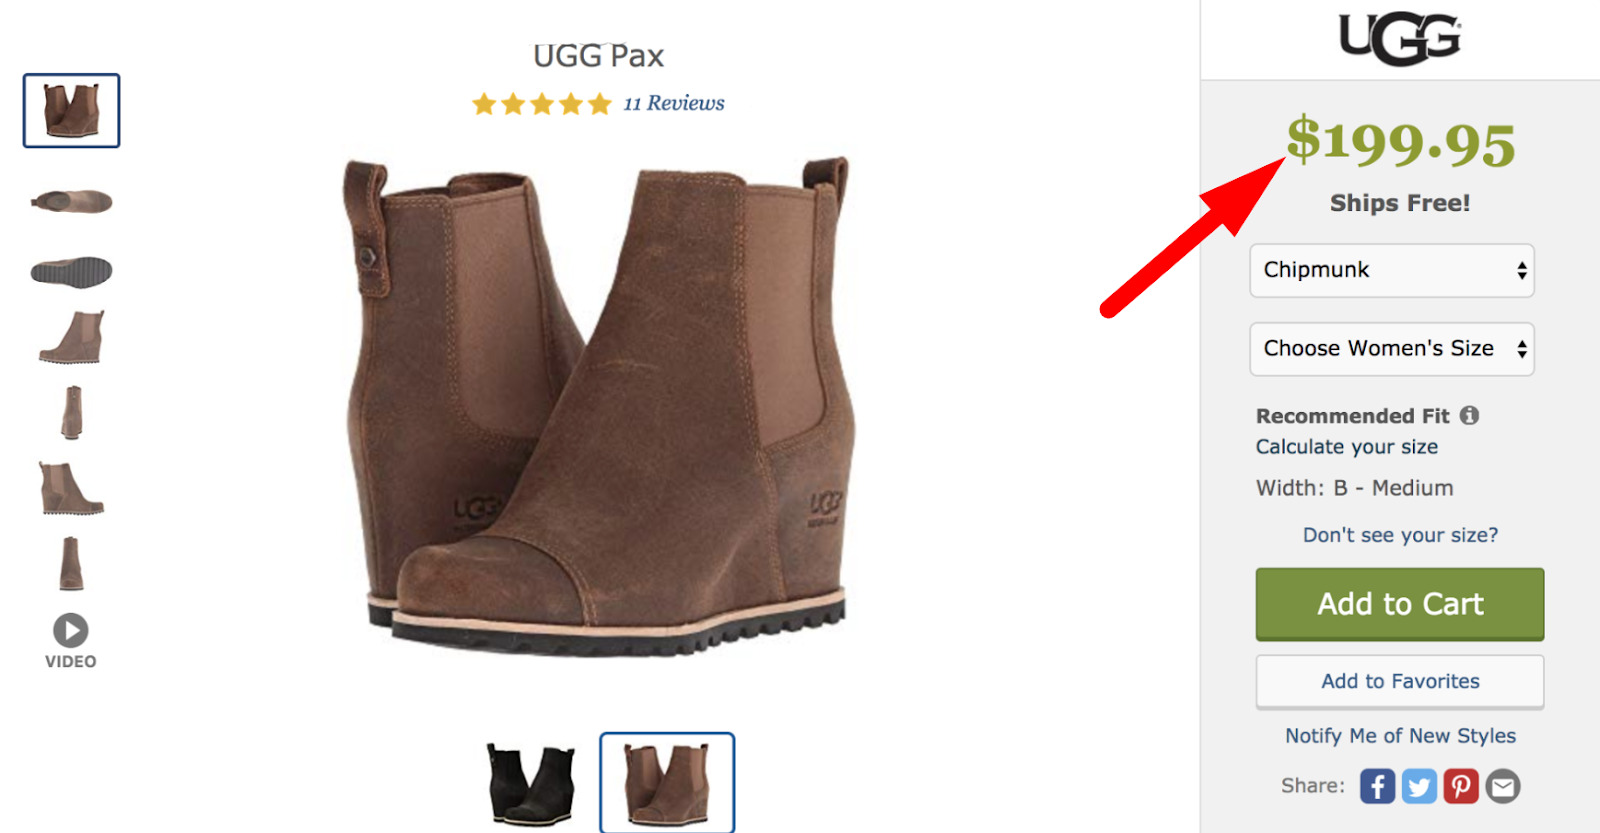 UGG boots sport a bold price tag on its product page.